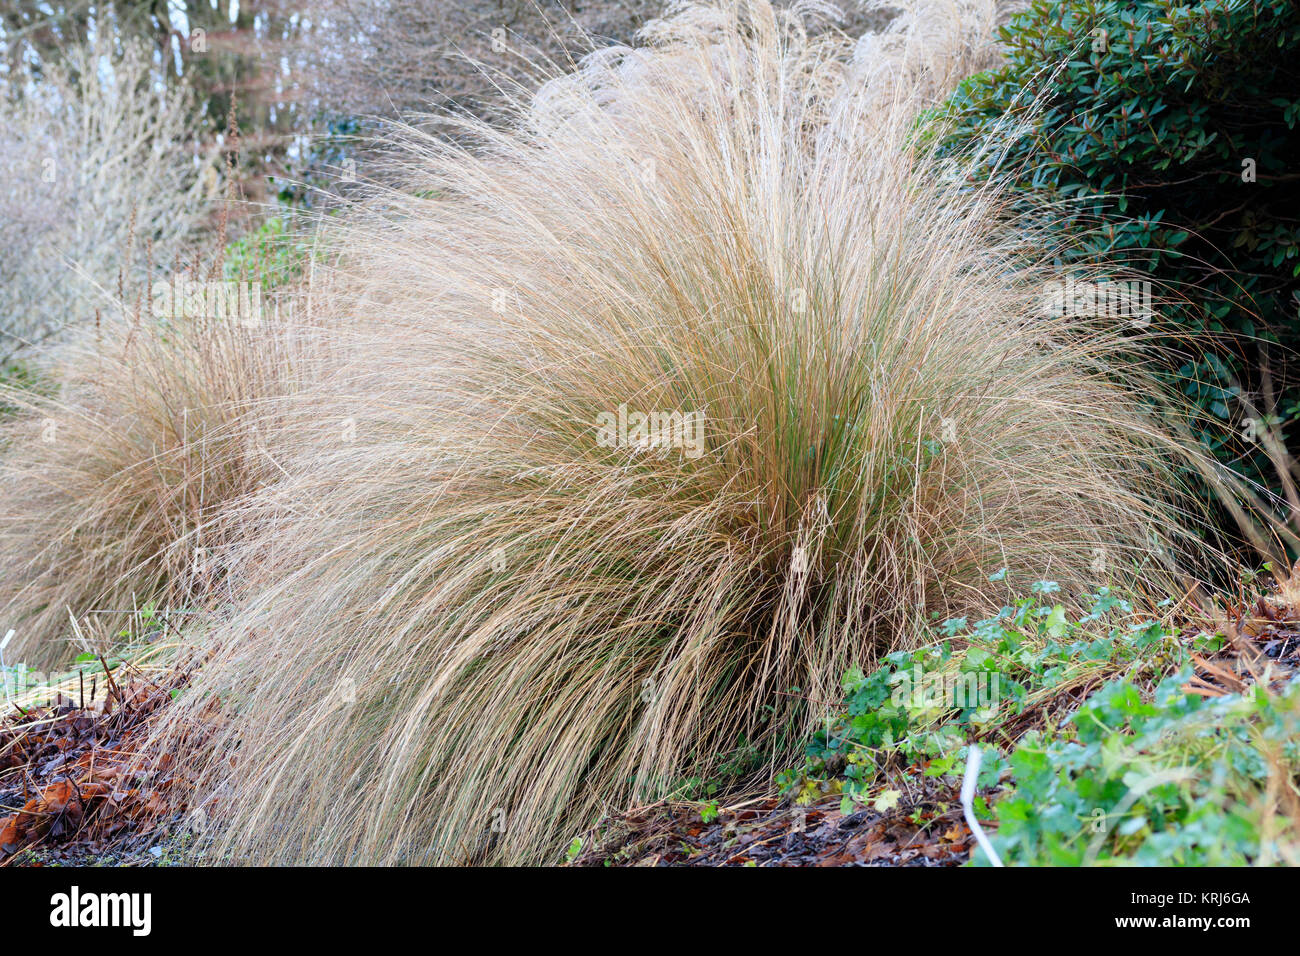 Arching stems form a semi circular mound of the red tussock grass, Chionochloa rubra Stock Photo